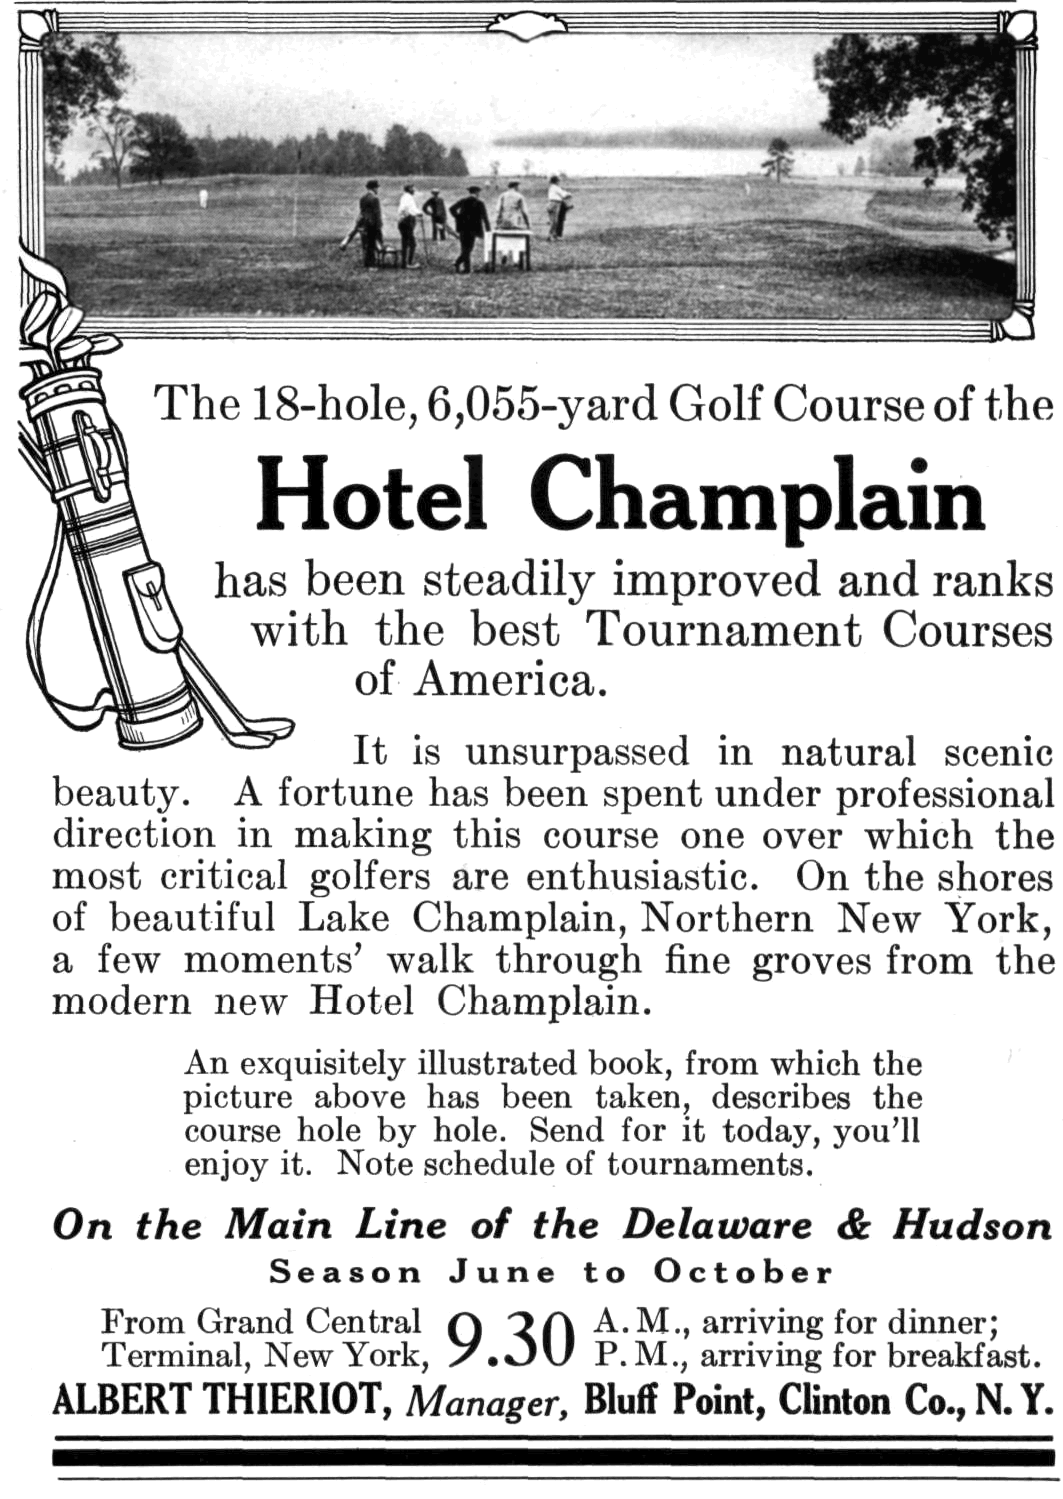 A photo of a Vintage Ad for Hotel Champlain, America's 1st golf resort